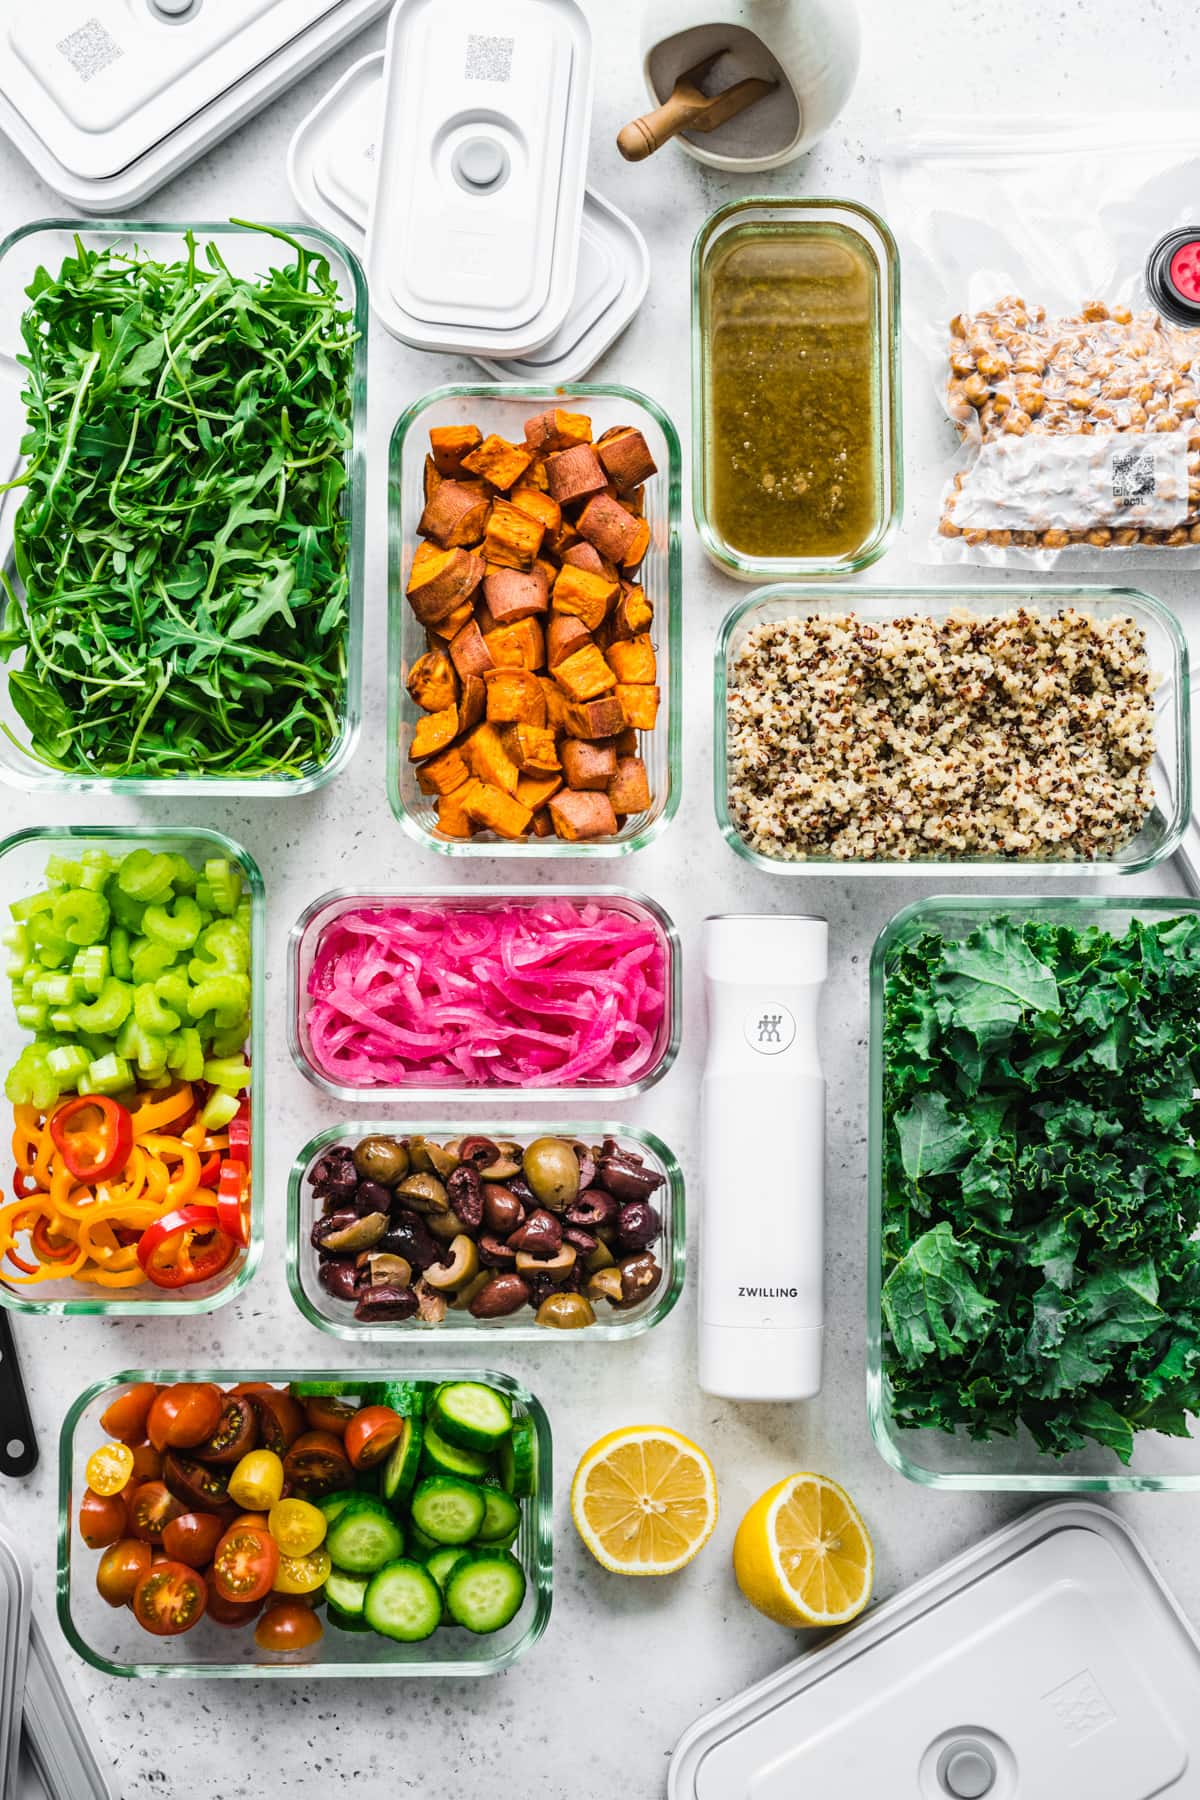 overhead view of several meal prep containers filled with various salad ingredients, like roasted and raw sliced vegetables, greens, quinoa, etc.